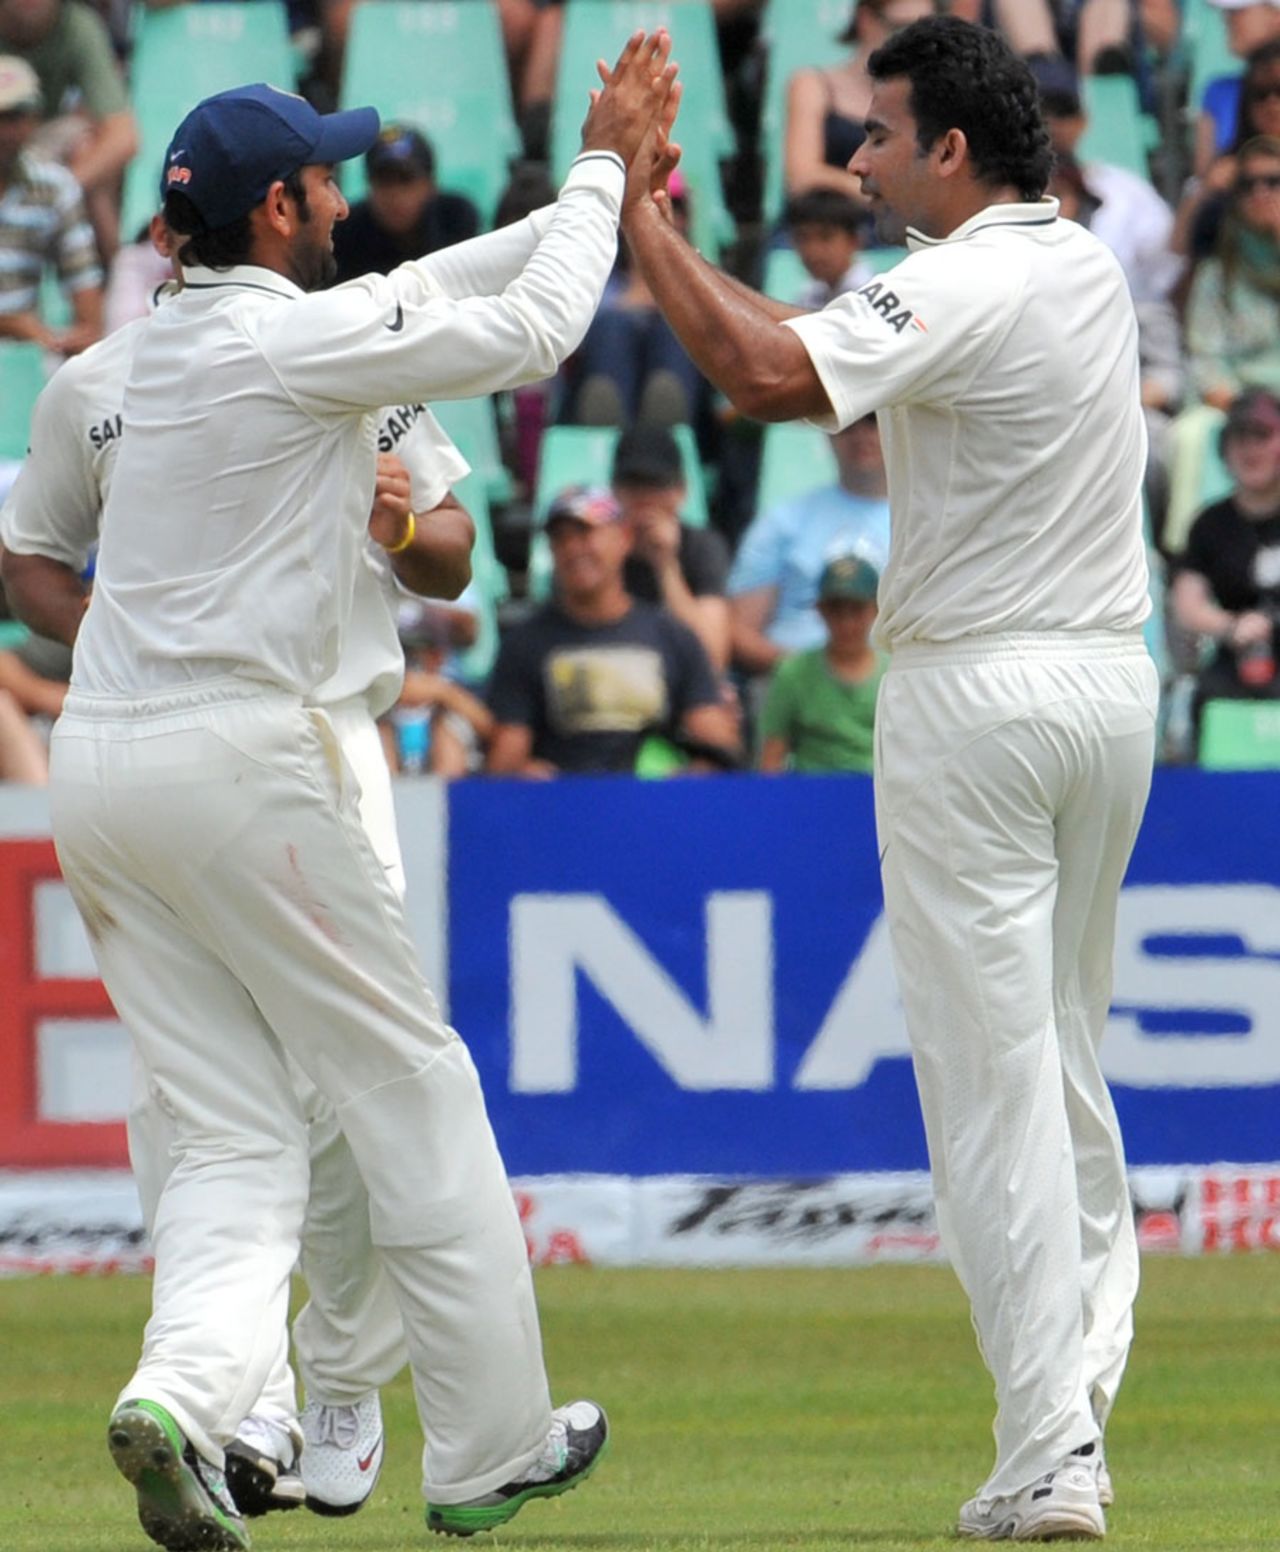 Zaheer Khan celebrates his third wicket, South Africa v India, 2nd Test, Durban, 2nd day, December 27, 2010 